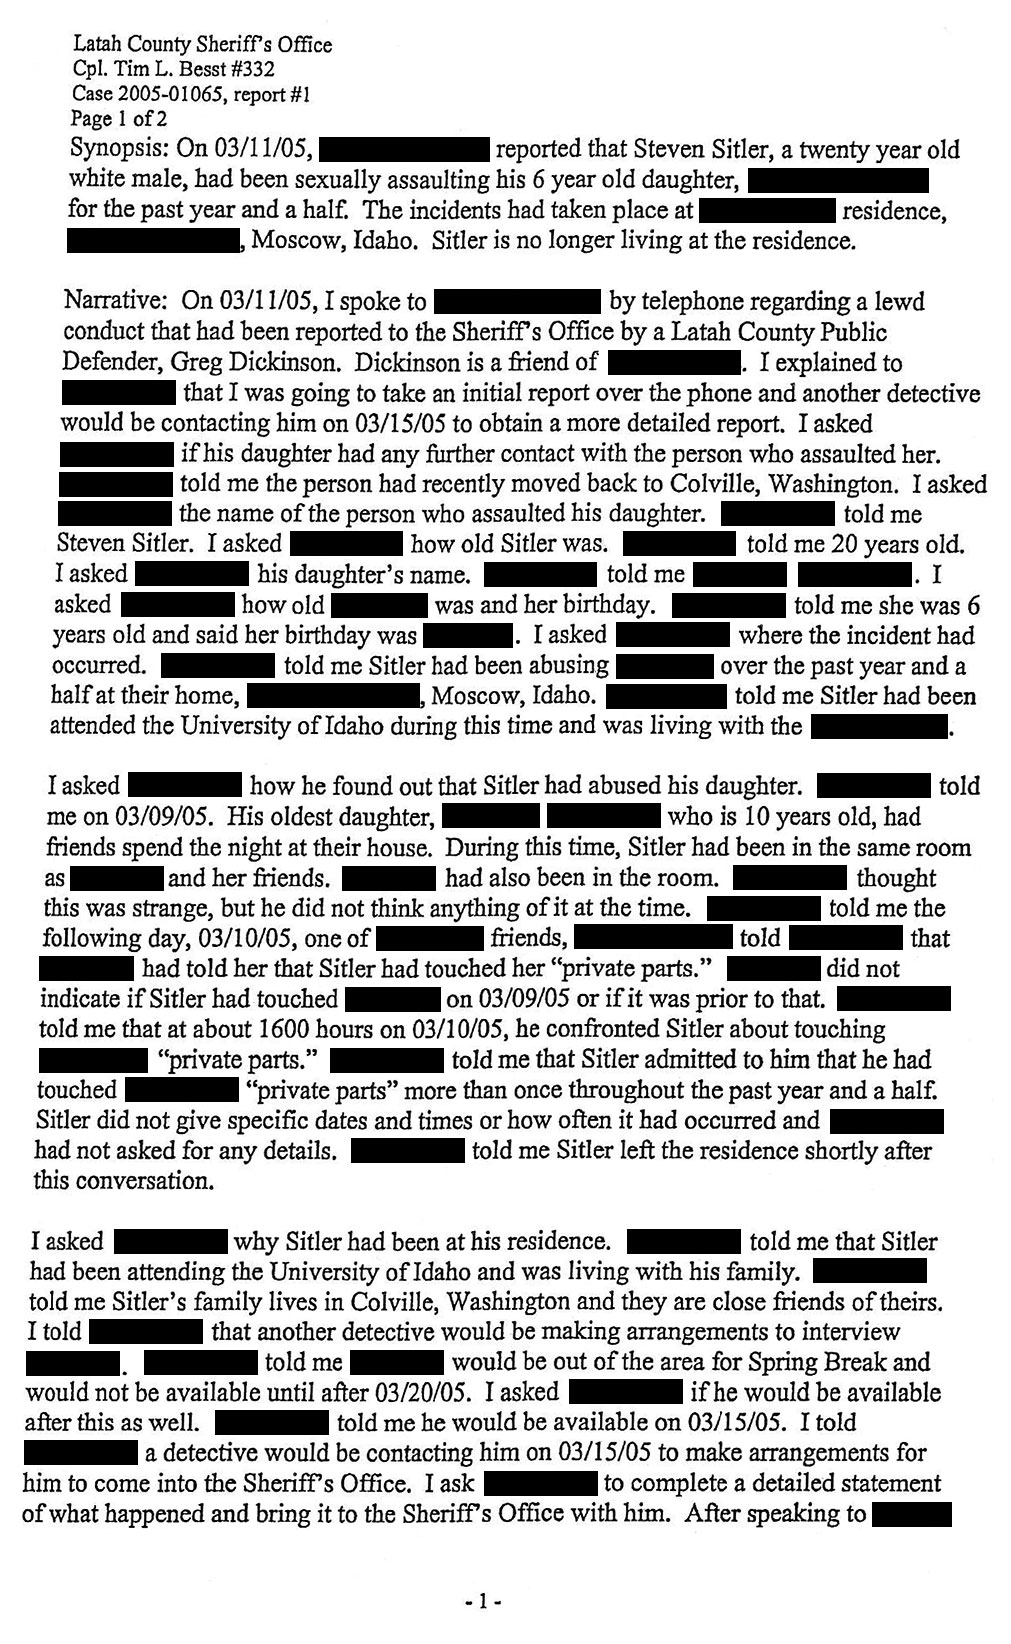 Report #1 page 1: “Steven Sitler, a twenty year old white male, had been sexually assaulting his 6 year old daughter. . .”